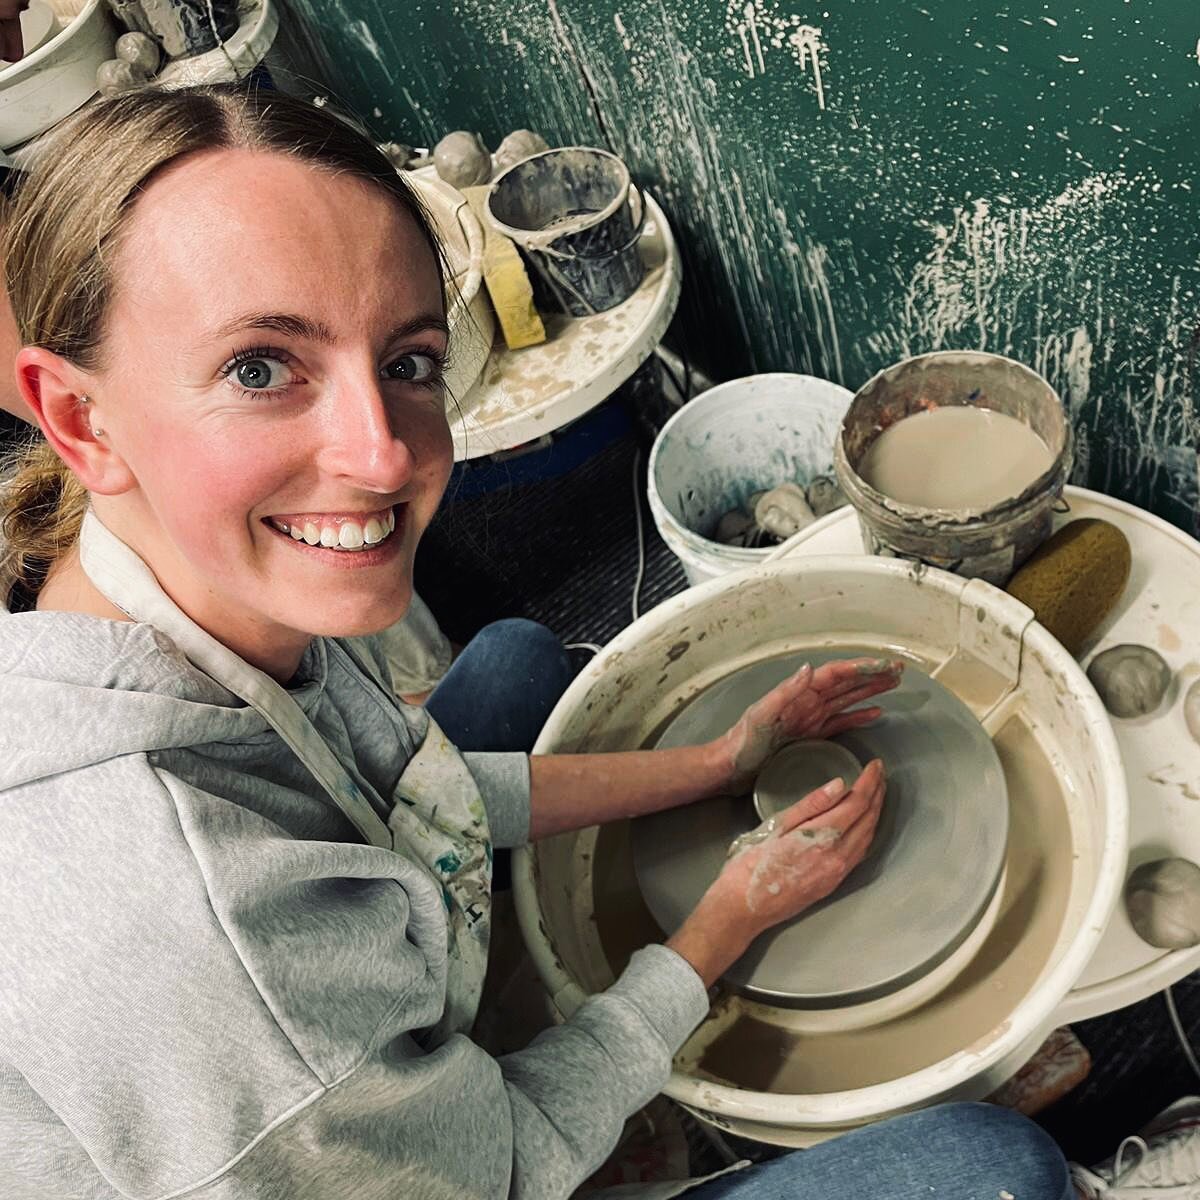 Earlier in the year I had a go at learning how to throw pottery @irisanddorastudios! 

It was a little trickier than I was first anticipating but so much fun! Highly recommend signing up for one of their workshops. 

I finally got round to getting so